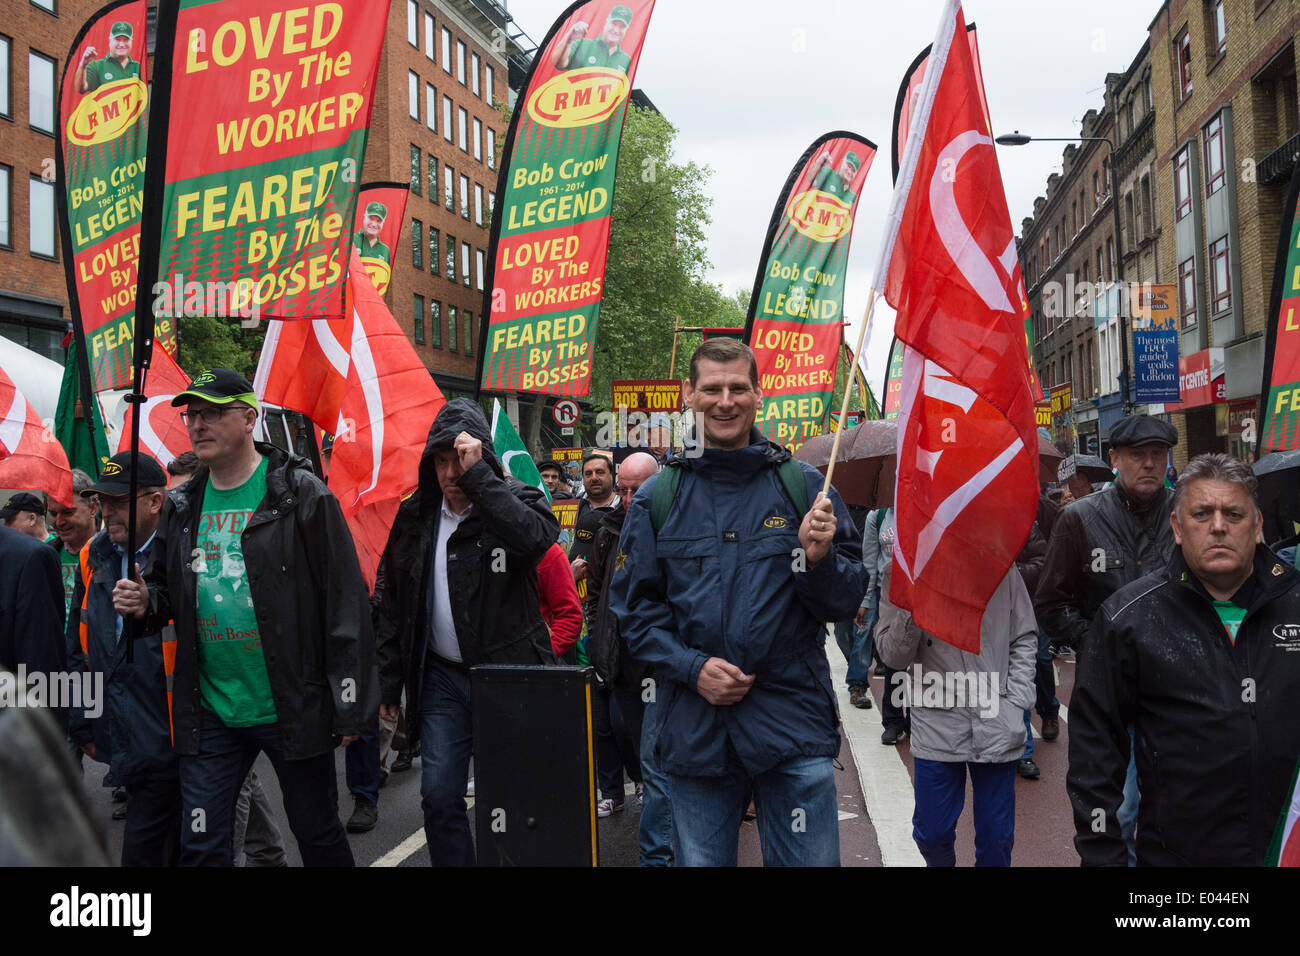 London UK. 01 May 2014.  The traditional May Day trade union march parades through London from Clerkenwell Green to Trafalgar Square. This years event honoured Labour politician Tony Benn and RMT union leader Bob Crow who died earlier this year. Credit:  Patricia Phillips/Alamy Live News Stock Photo